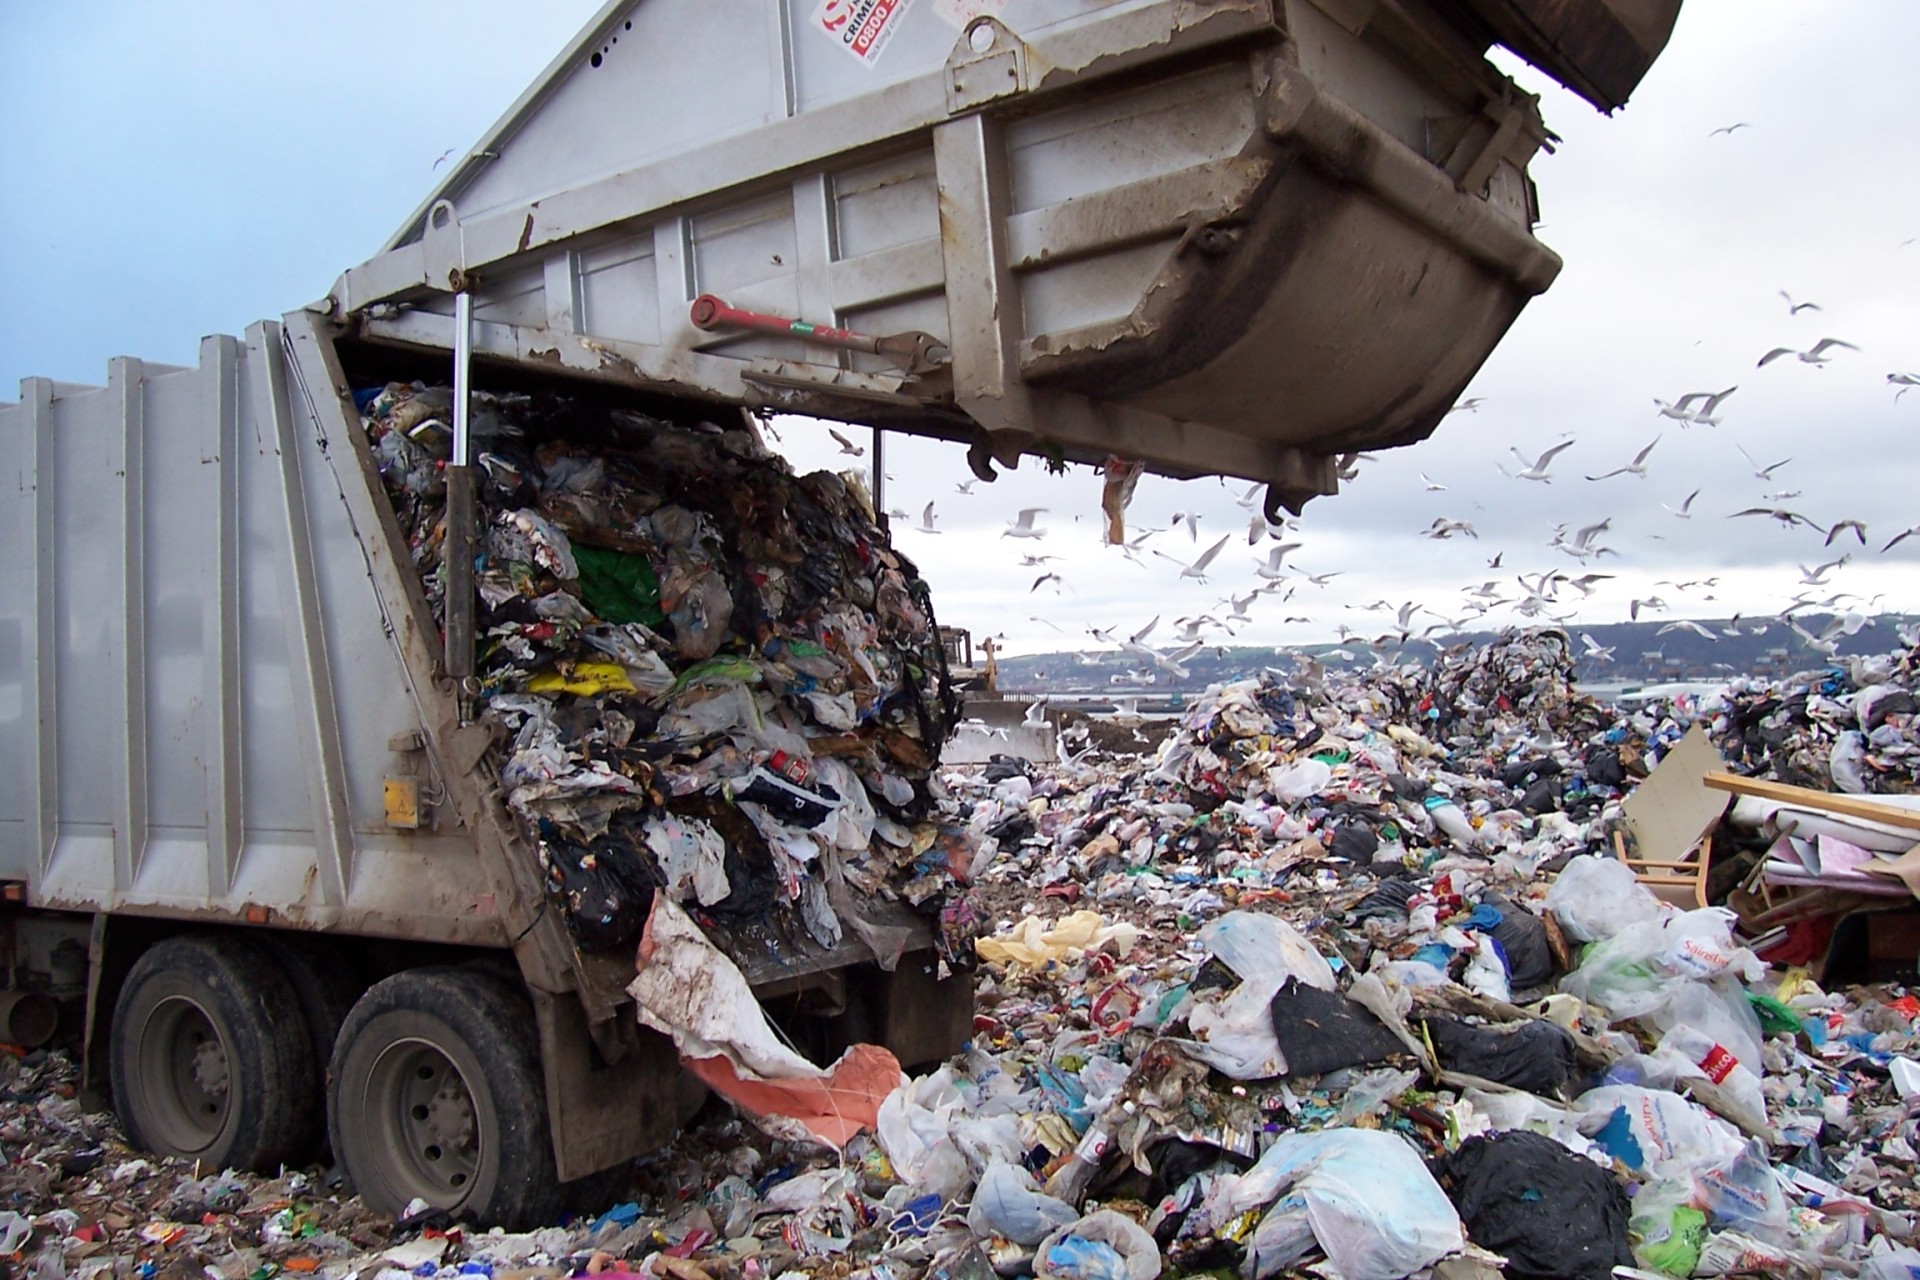 Every year, U.S. landfills are filled with 139.6 million tons of waste, according to the E.P.A. Renovation Angel has kept 50 million pounds out of landfills, according to Feldman, including this one in Minnesota. (Credit: Flickr/MPCA Photo)